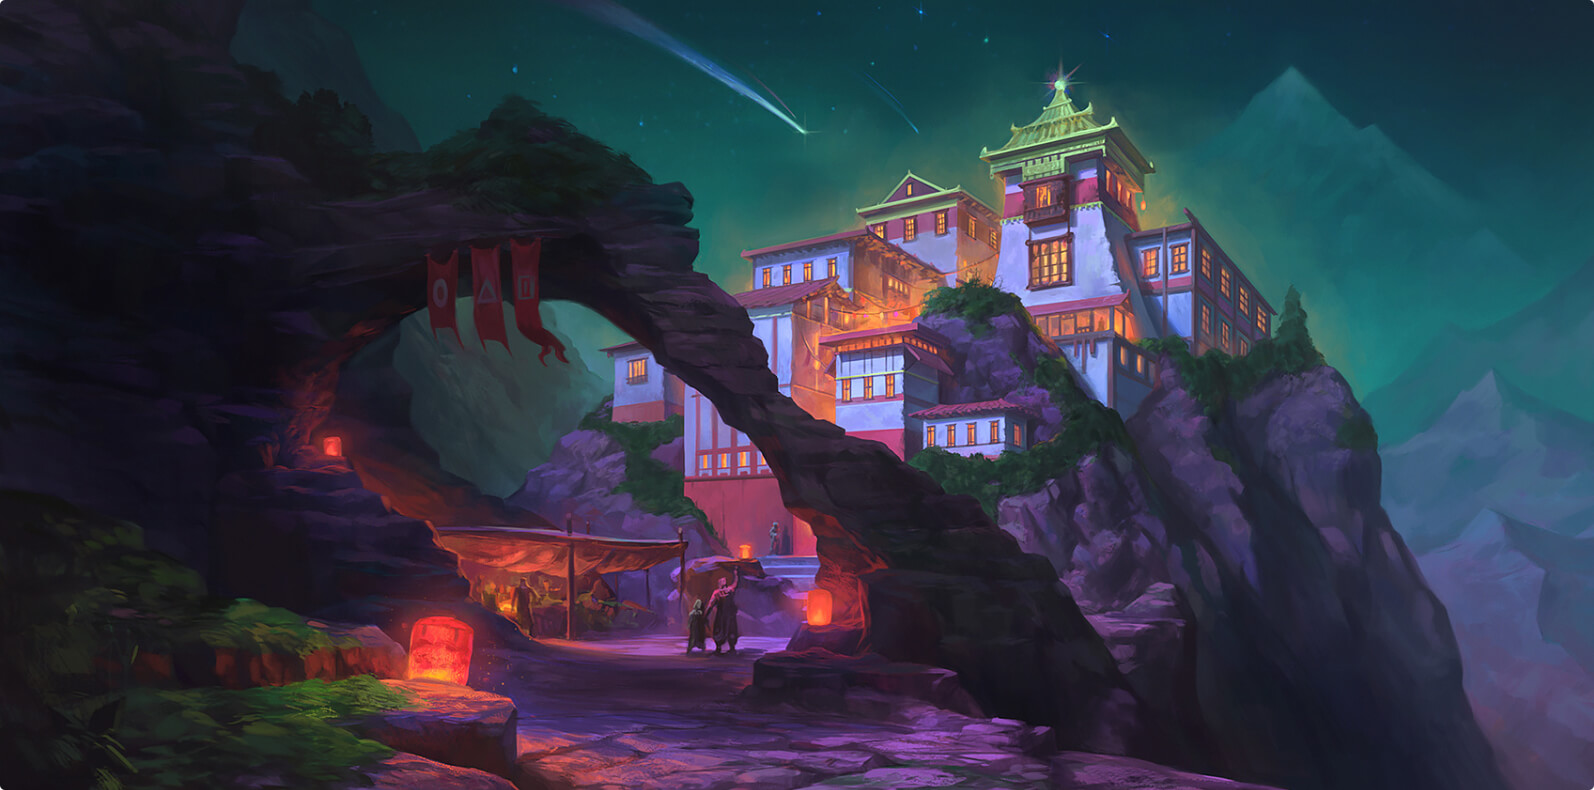 Asian Temple concept art and illustration design